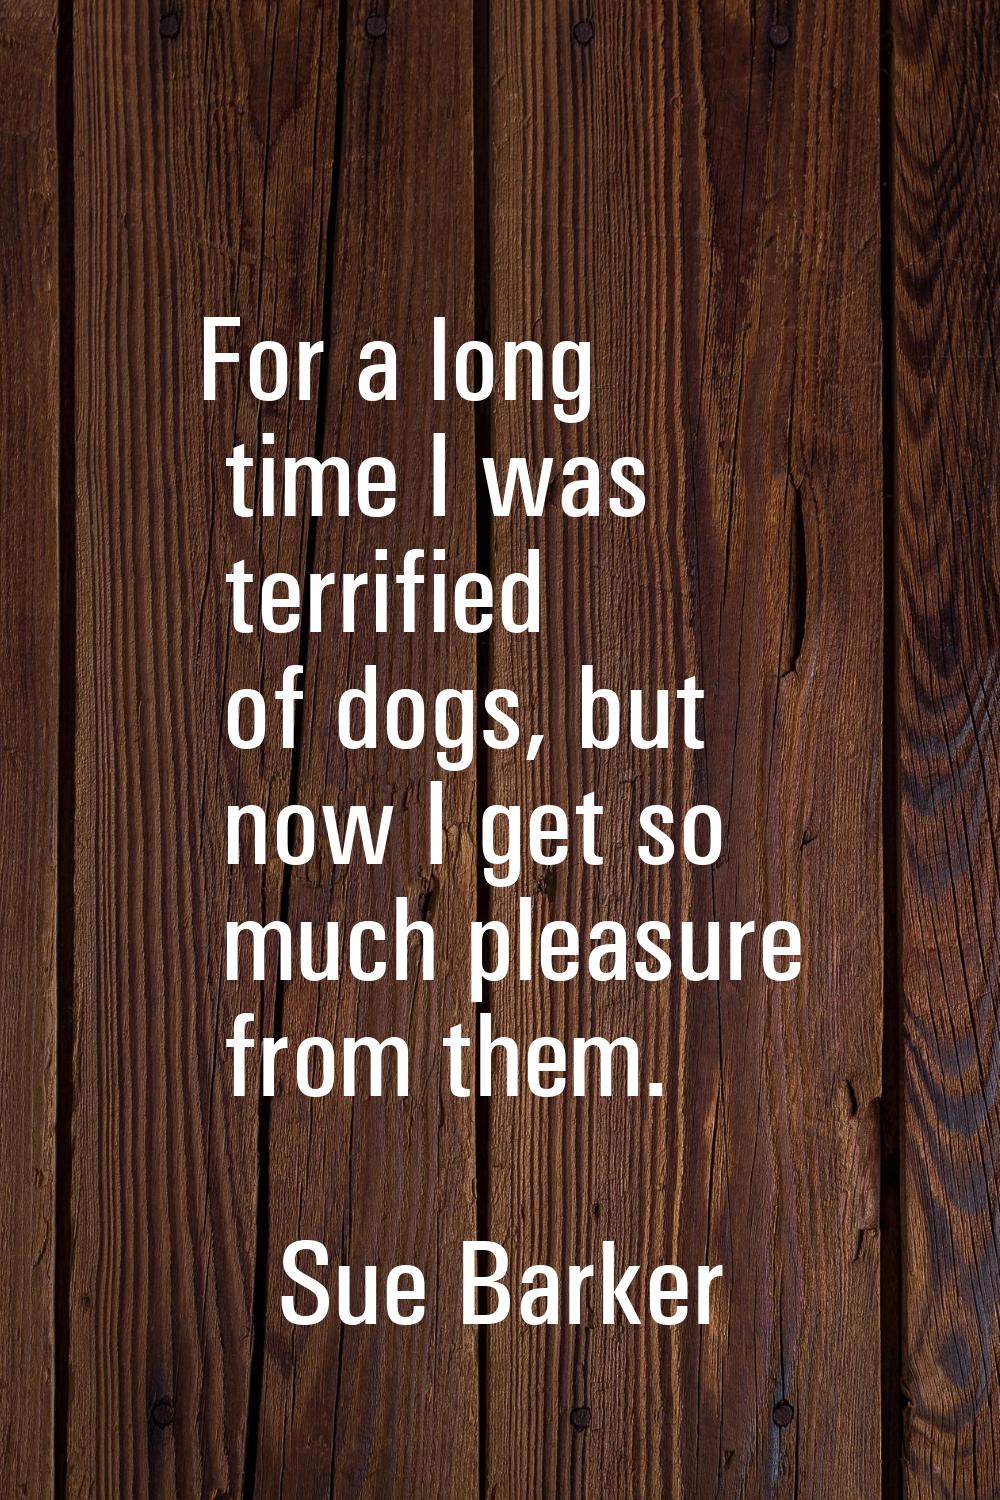 For a long time I was terrified of dogs, but now I get so much pleasure from them.